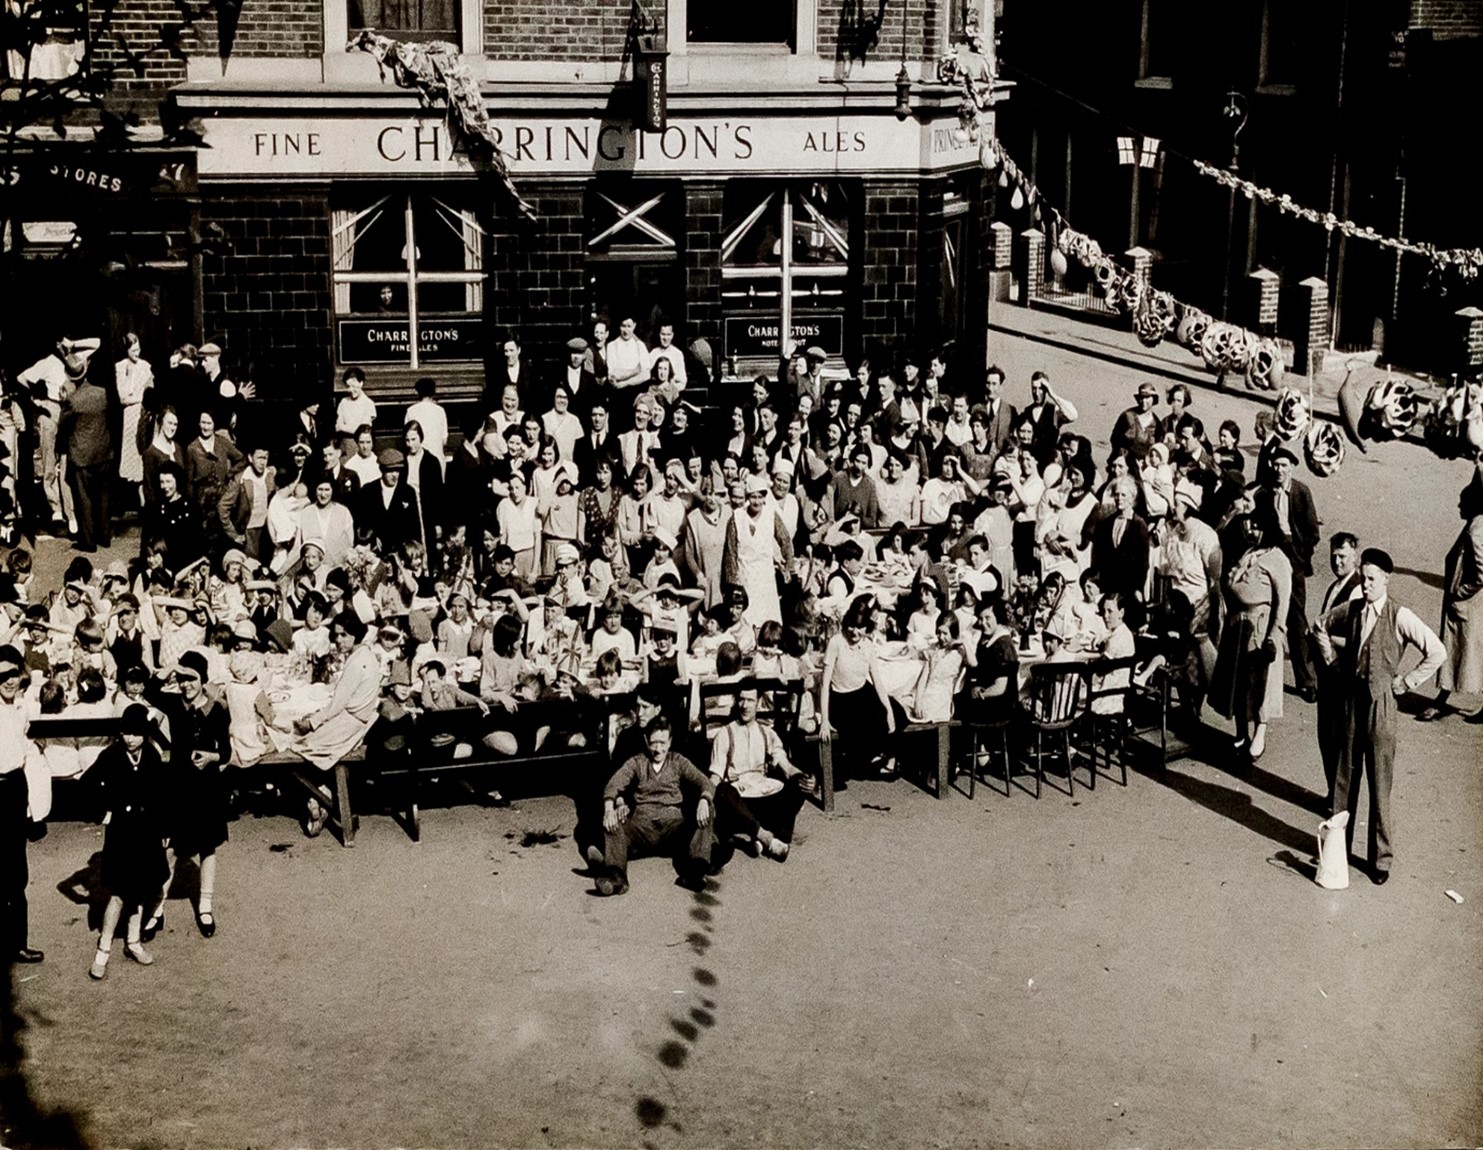 Alscot Road,1935, Silver Jubilee Street party, outside Prince Alfred Pub. X.jpg